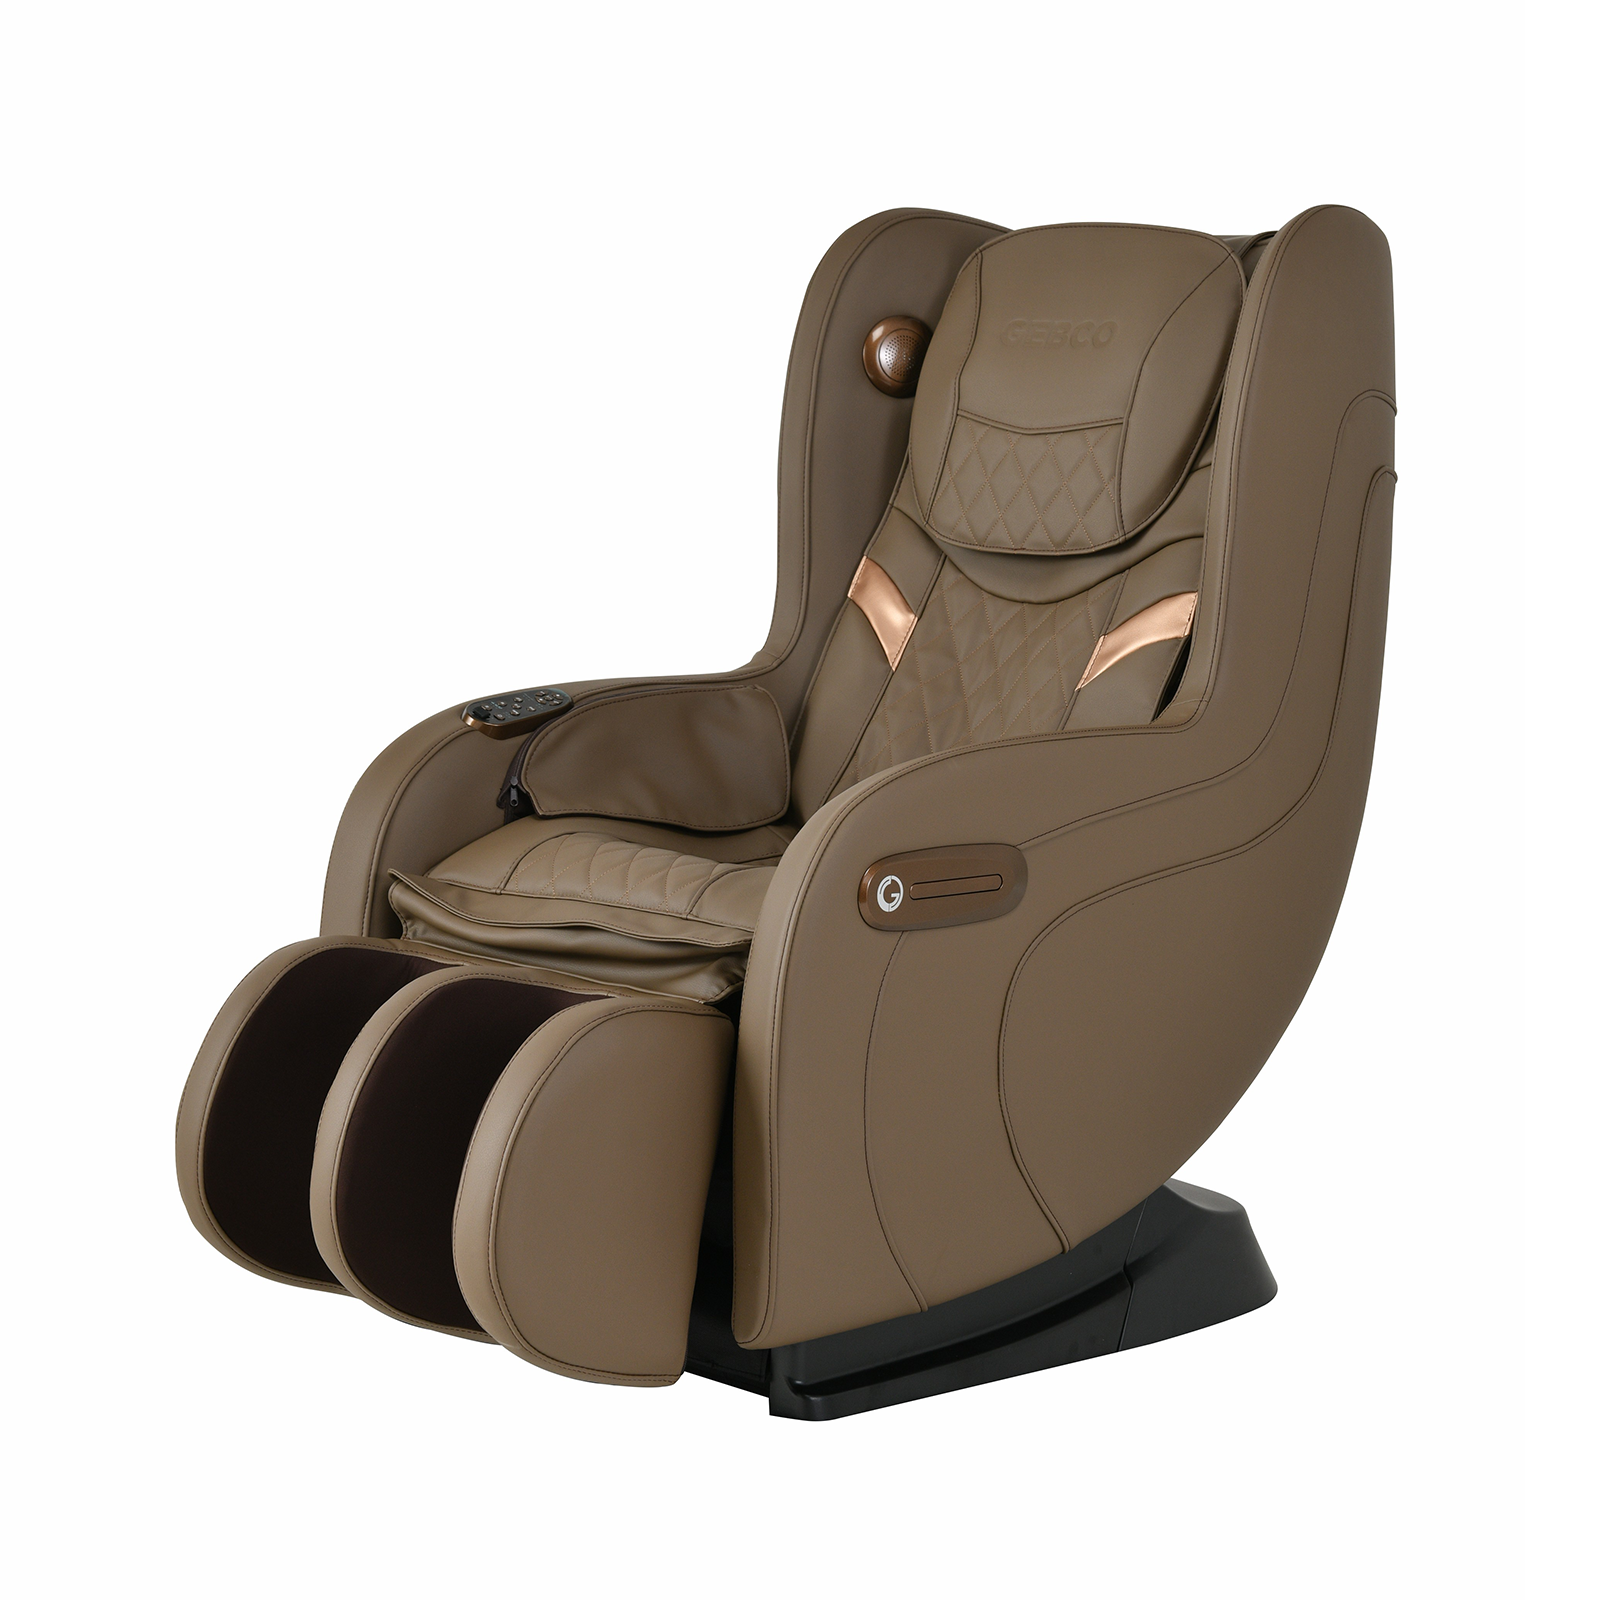 Comely SL-Track Lite Massage Chair (Black)